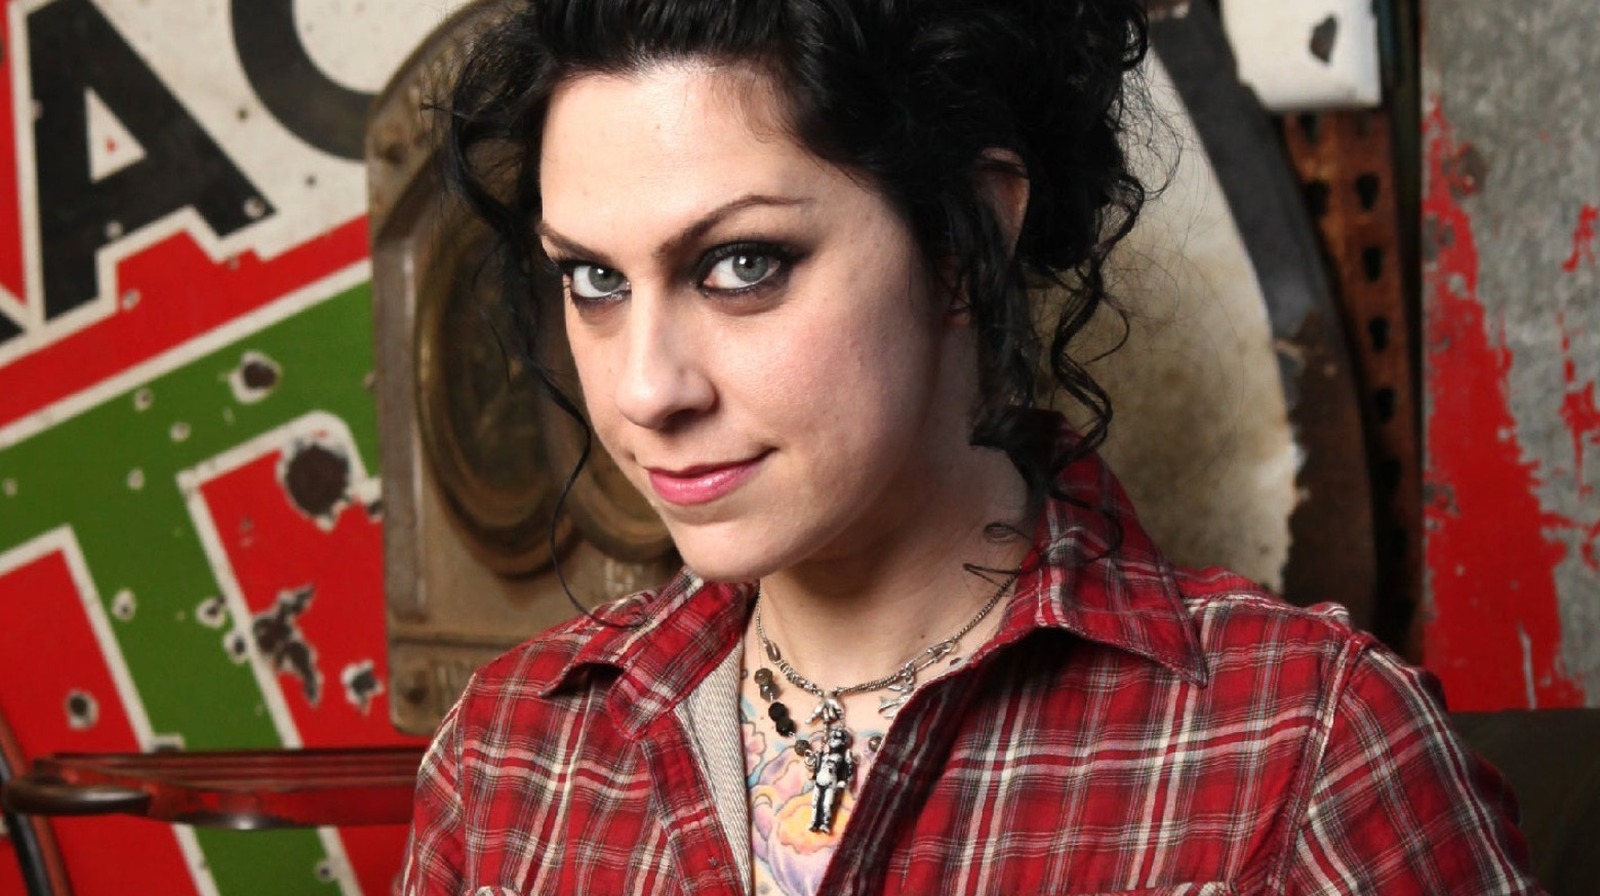 American Pickers Fans Have Some Bleak Opinions On Danielle Colby 